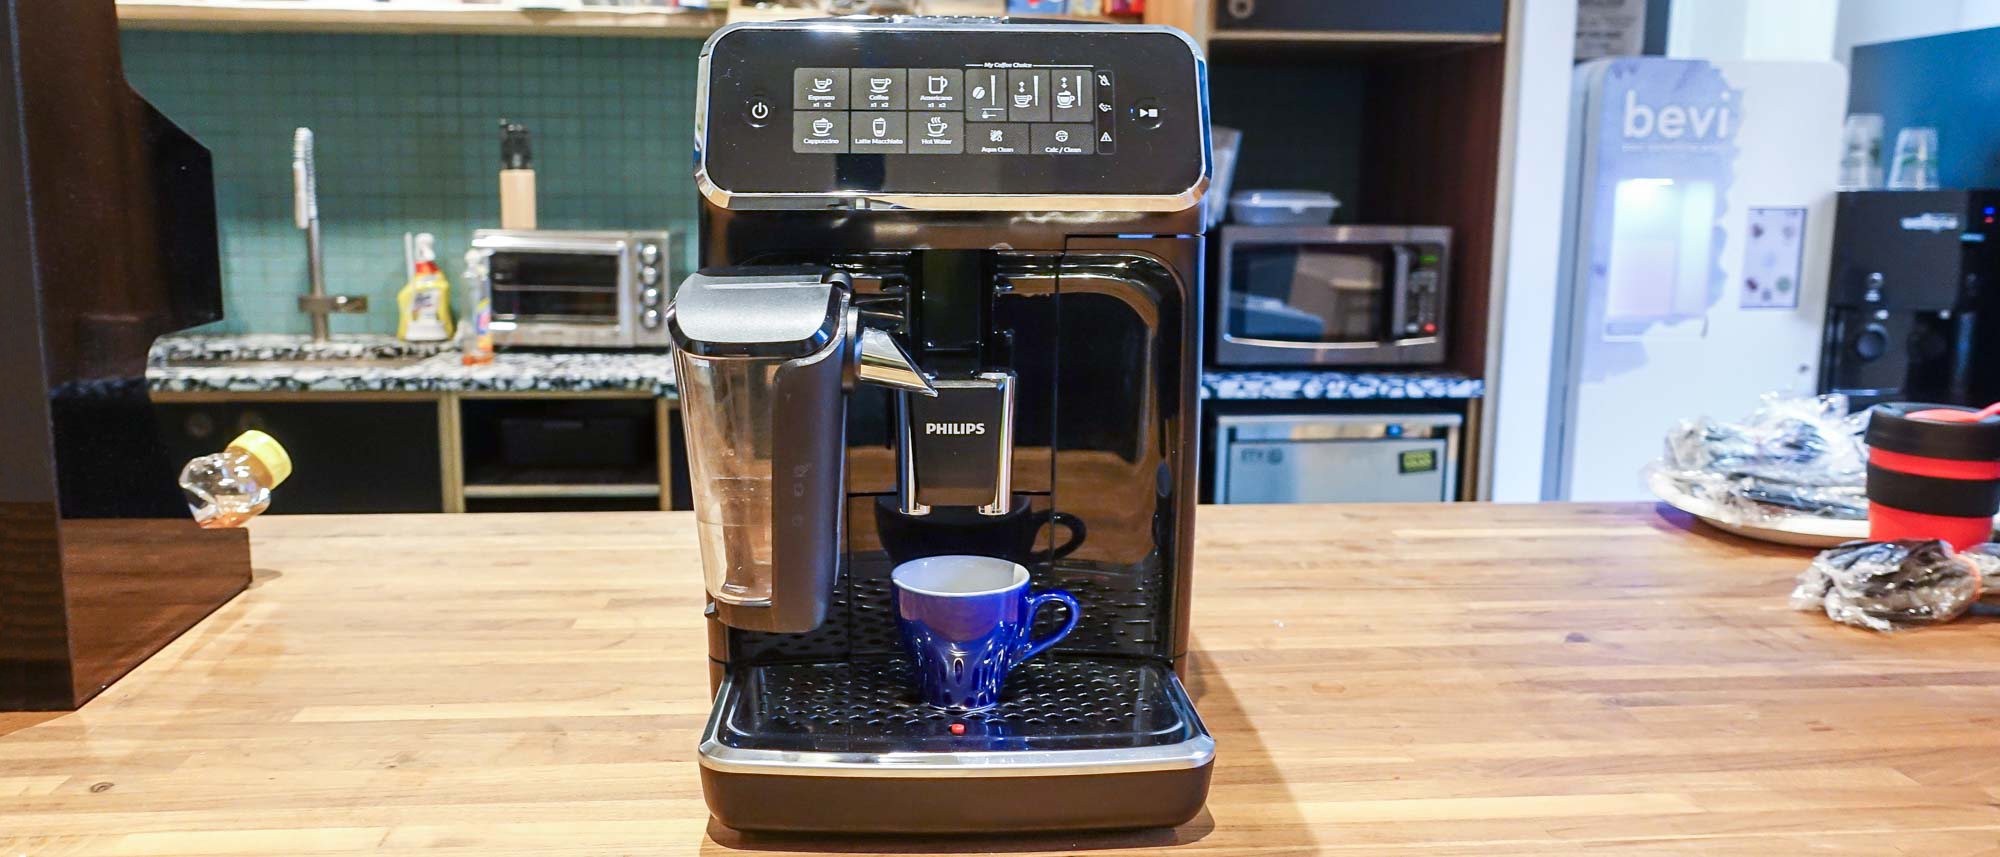 The Best Coffee Maker Ever? Our Review of the Philips 3200 Series Espresso  Machine with LatteGo - Clockwork 9